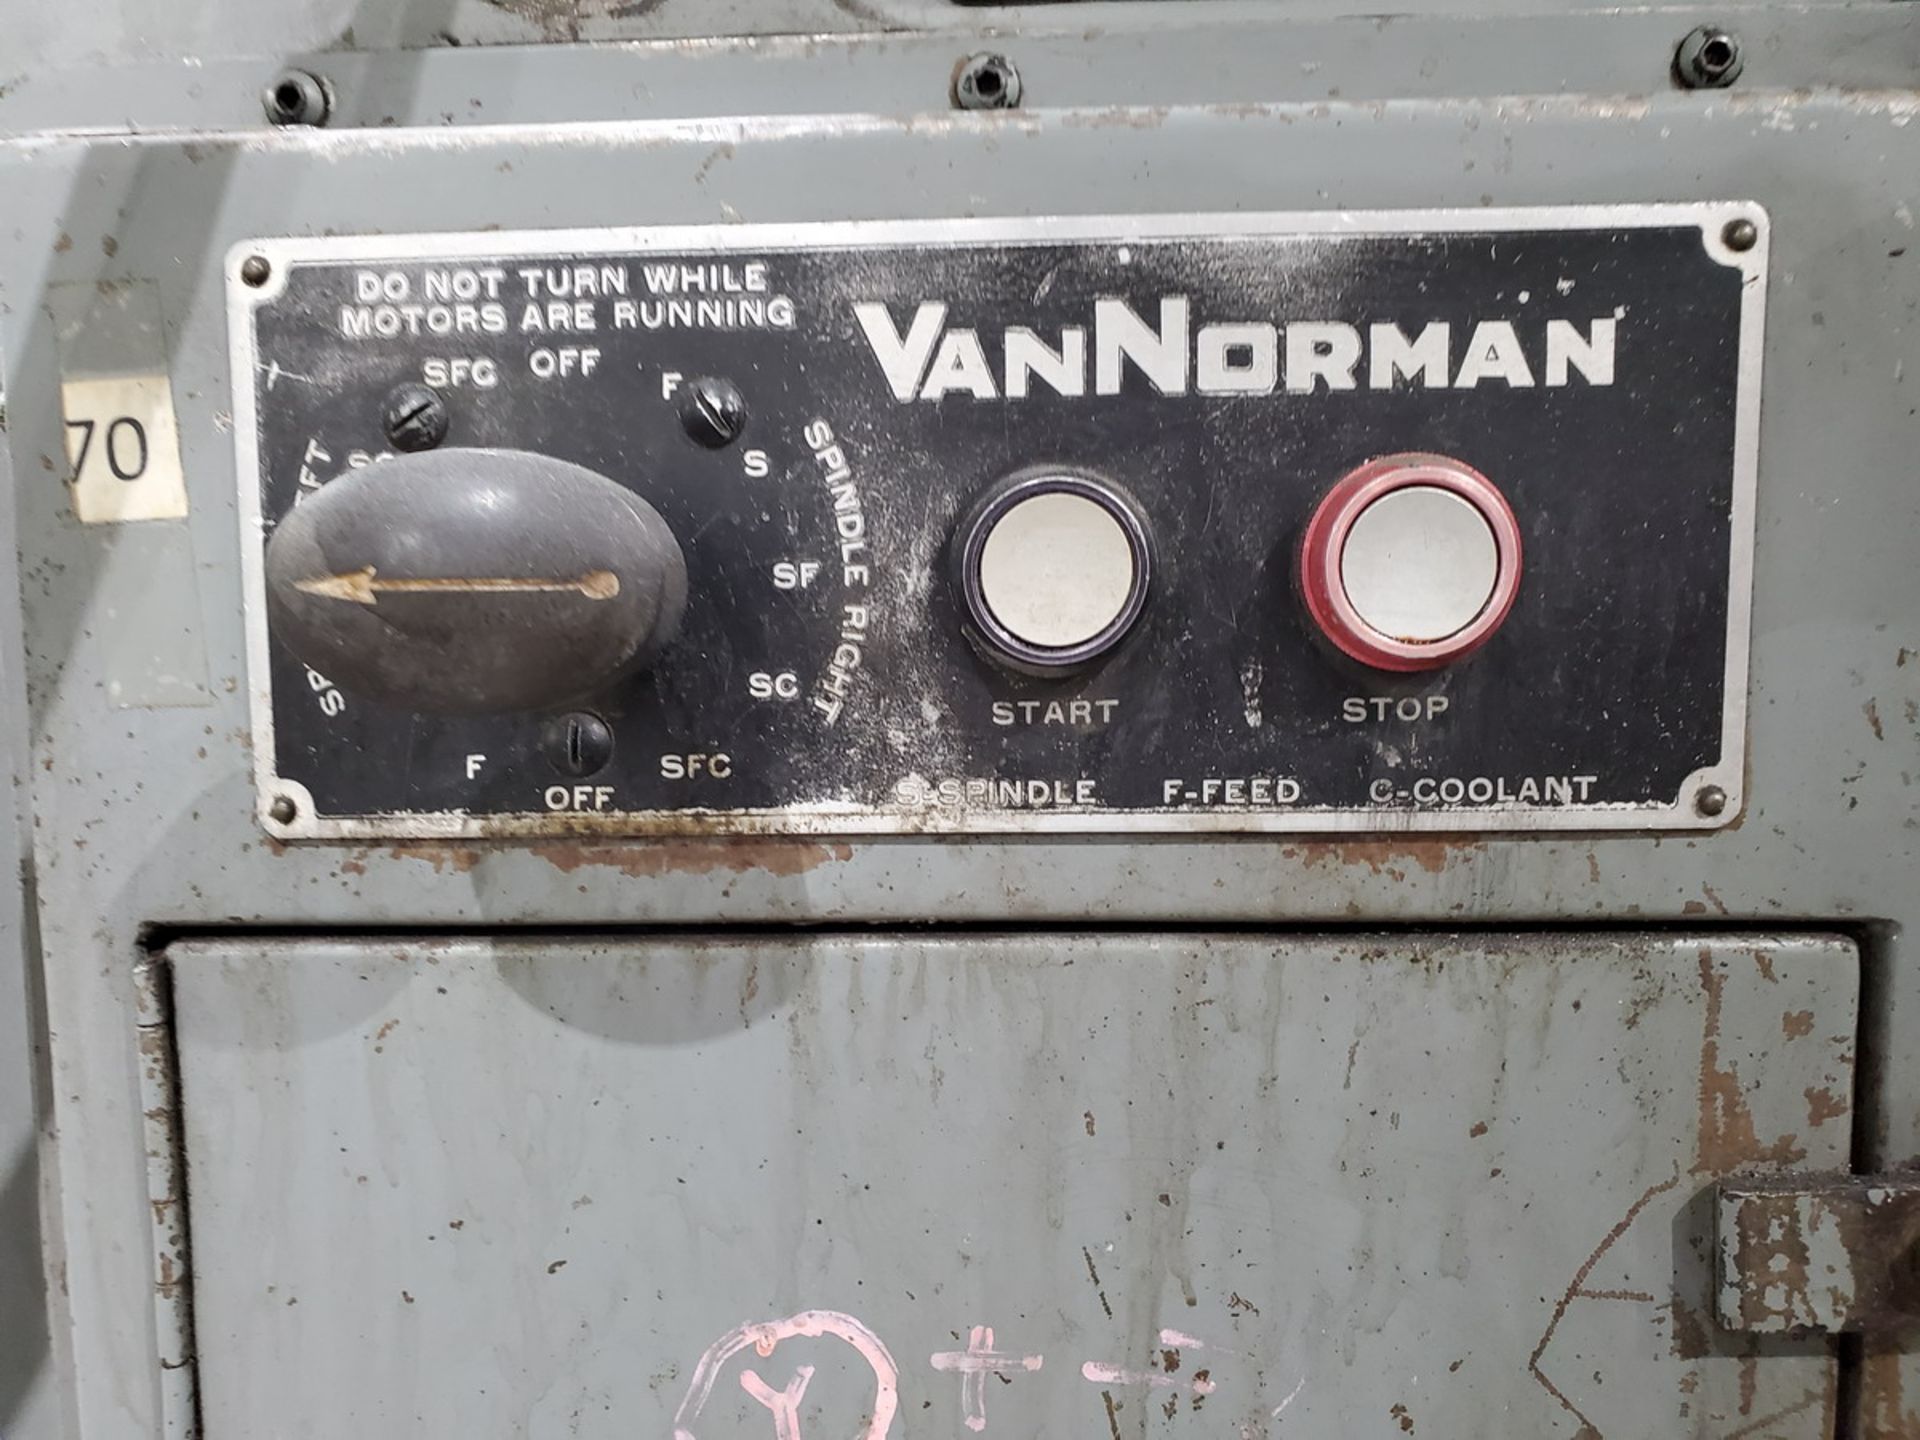 Van Norman 28A Vertical Milling Machine Size: 2; W/ 58" x 13" Slot Table - Image 17 of 18